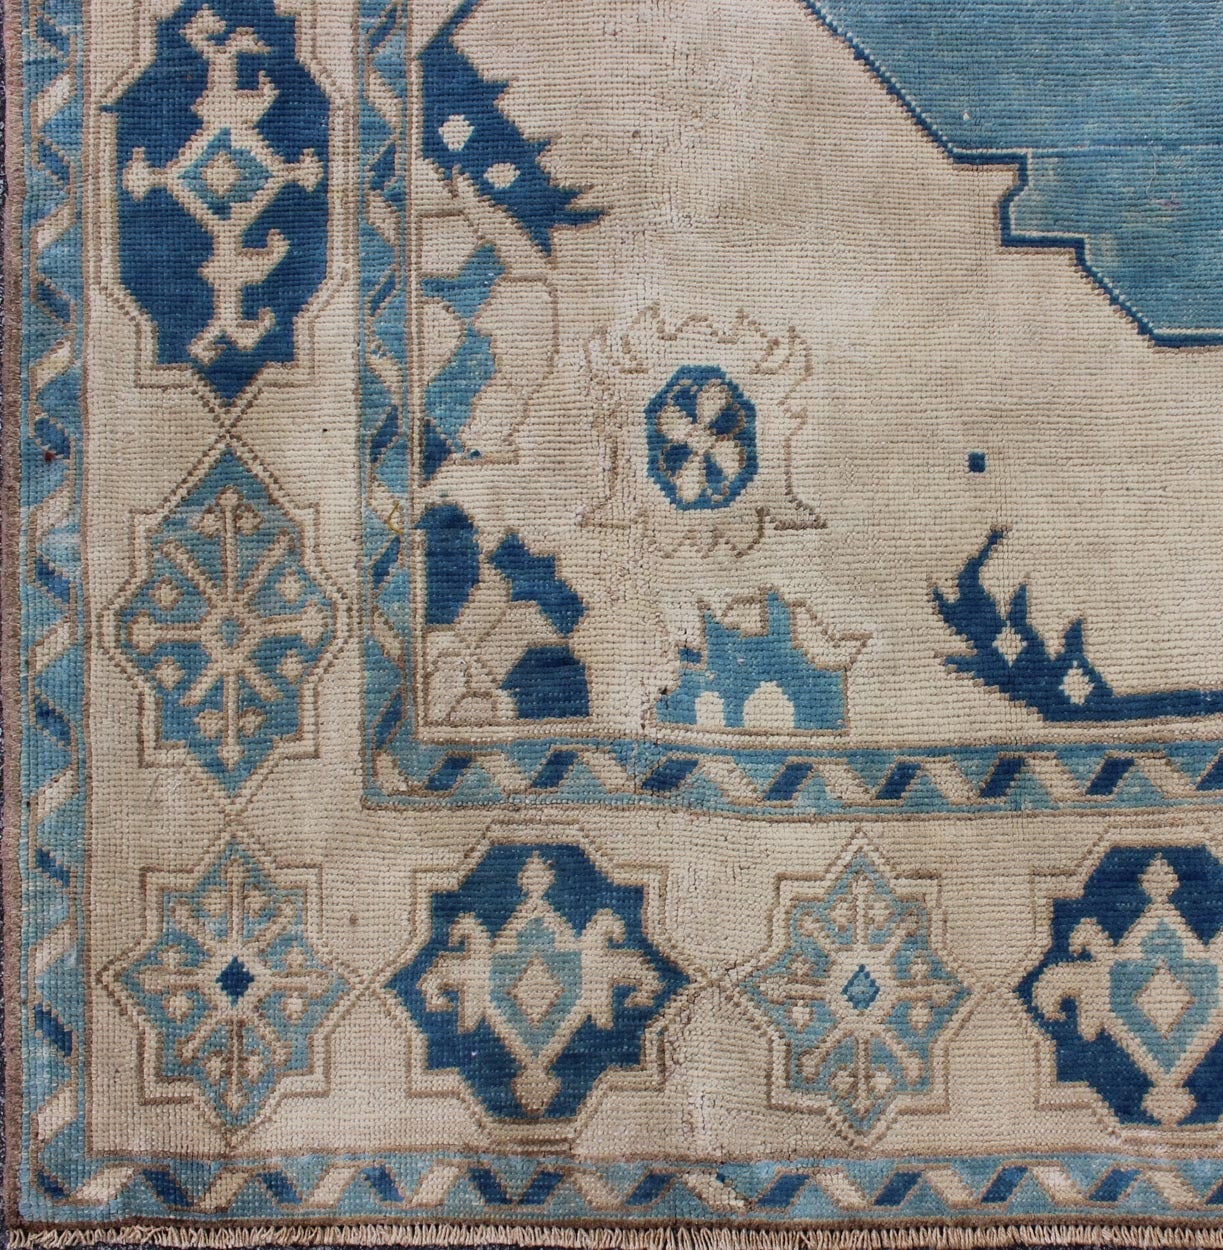 Oushak Vintage Turkish Rug with Central Medallion in Sky Blue, Ivory and Cream Tones